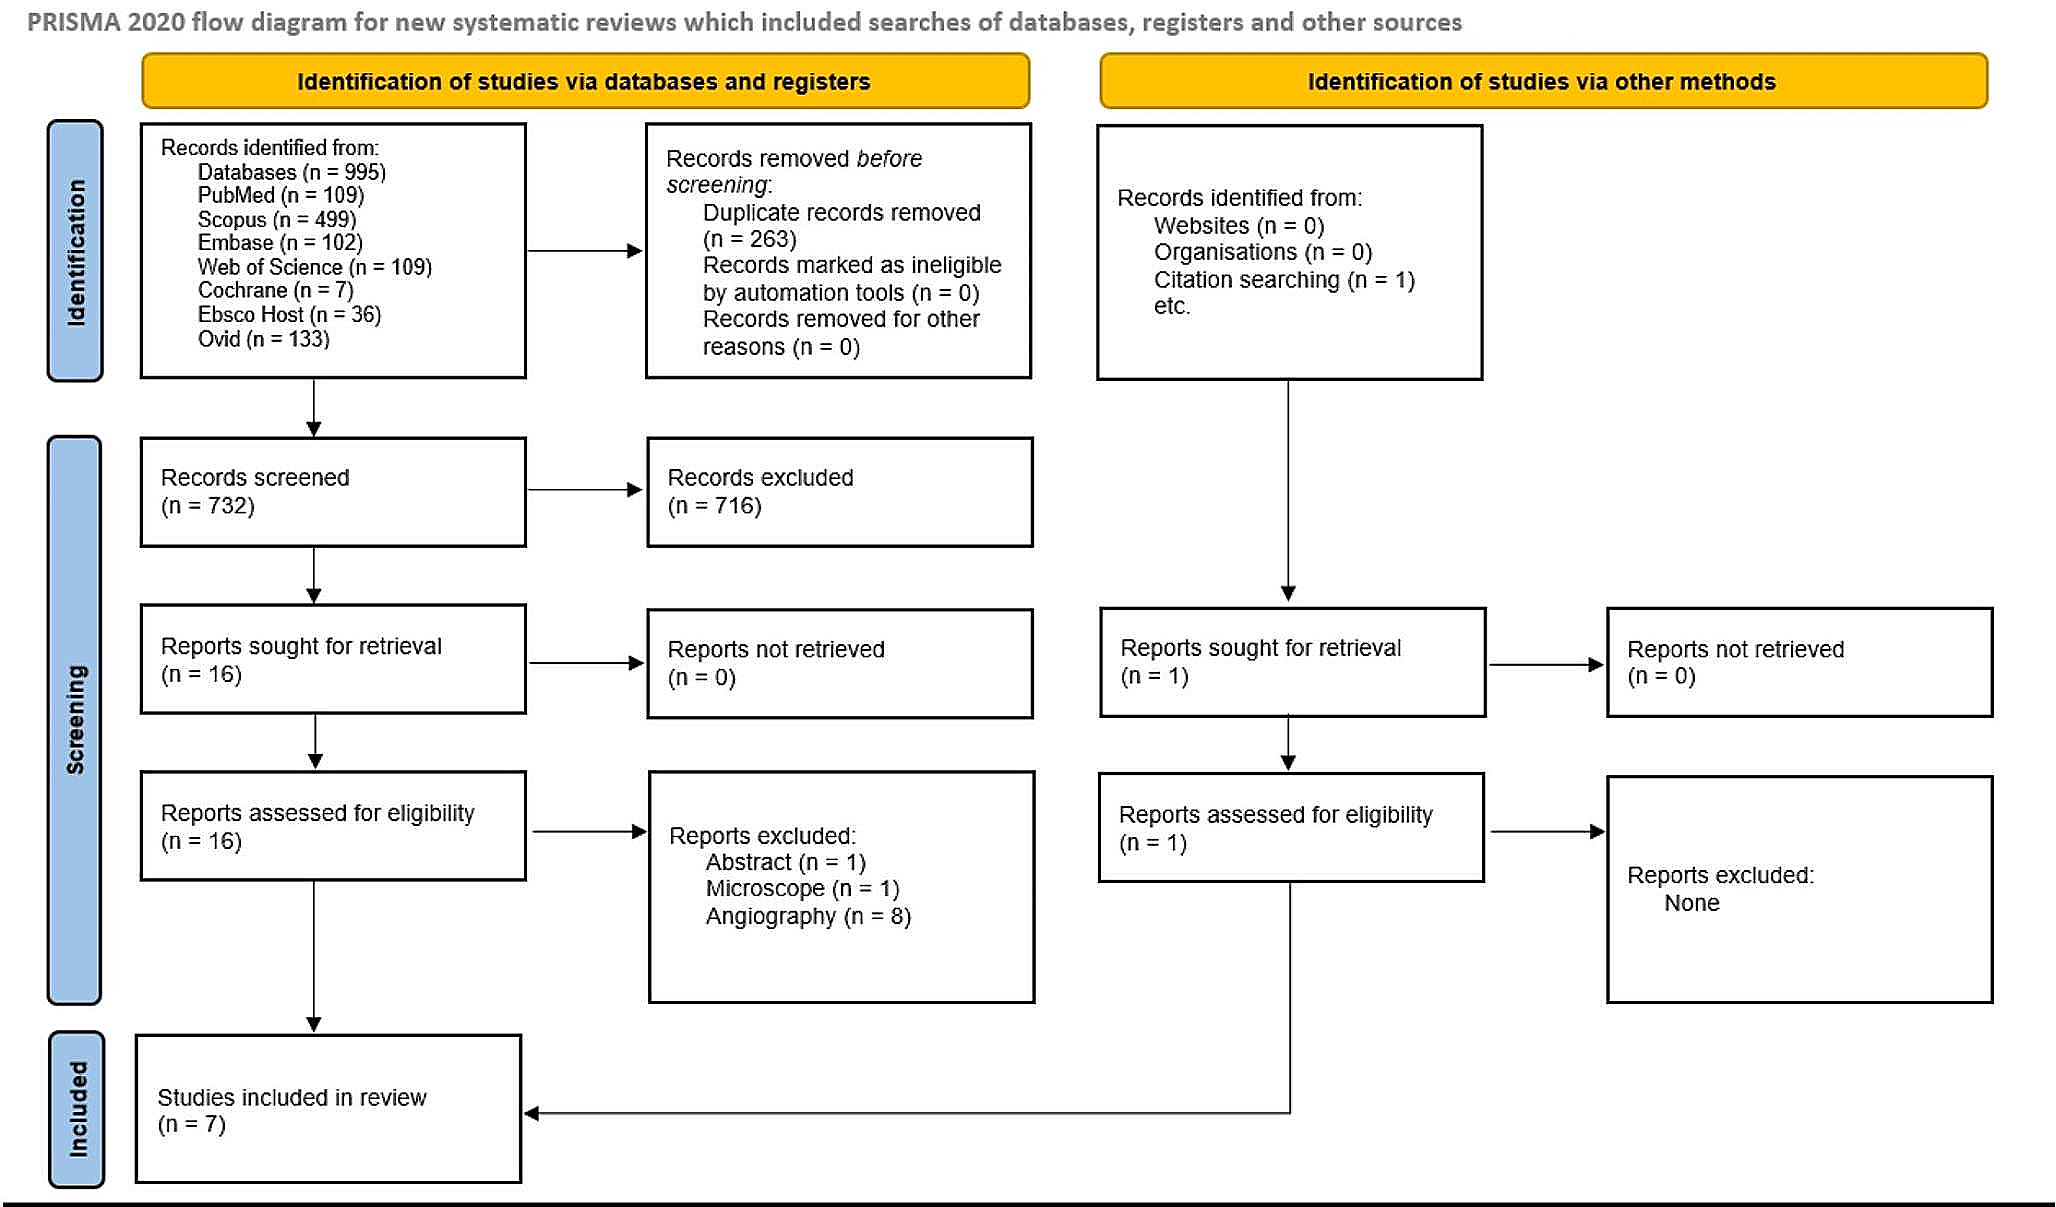 Bridging the gap: robotic applications in cerebral aneurysms neurointerventions - a systematic review